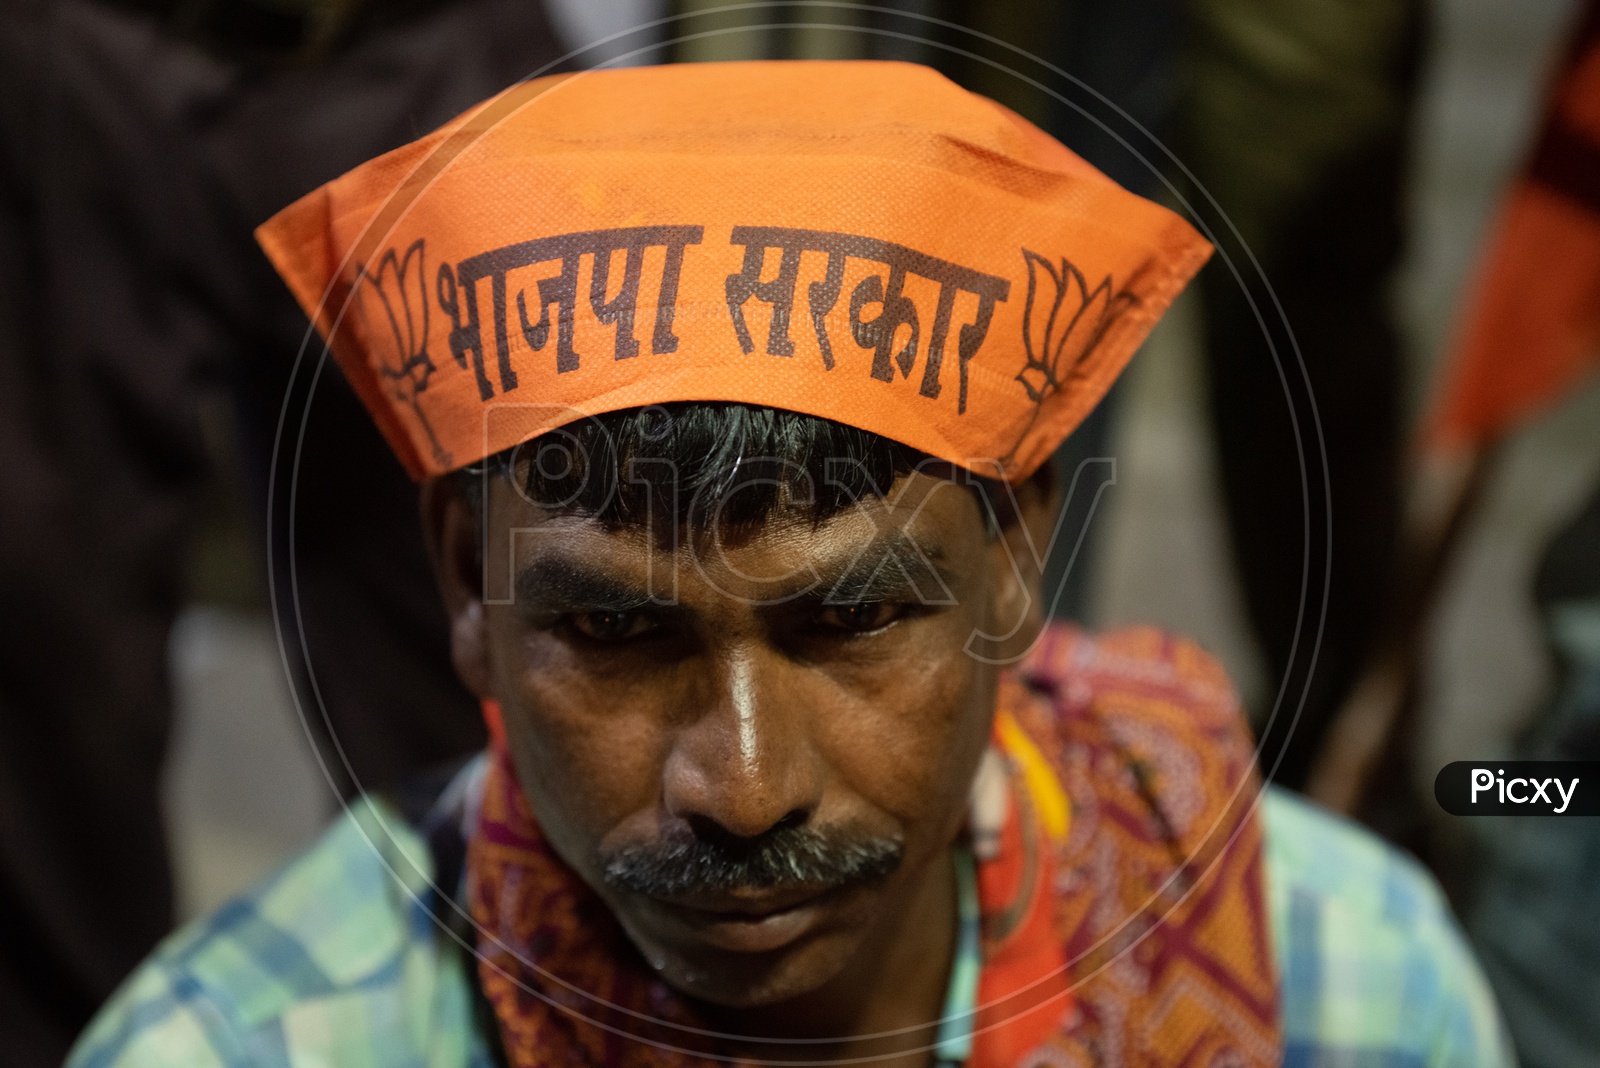 BJP Party Workers Or Supporters Wearing the BJP Caps During Election Campaign Rallies or Party Meetings